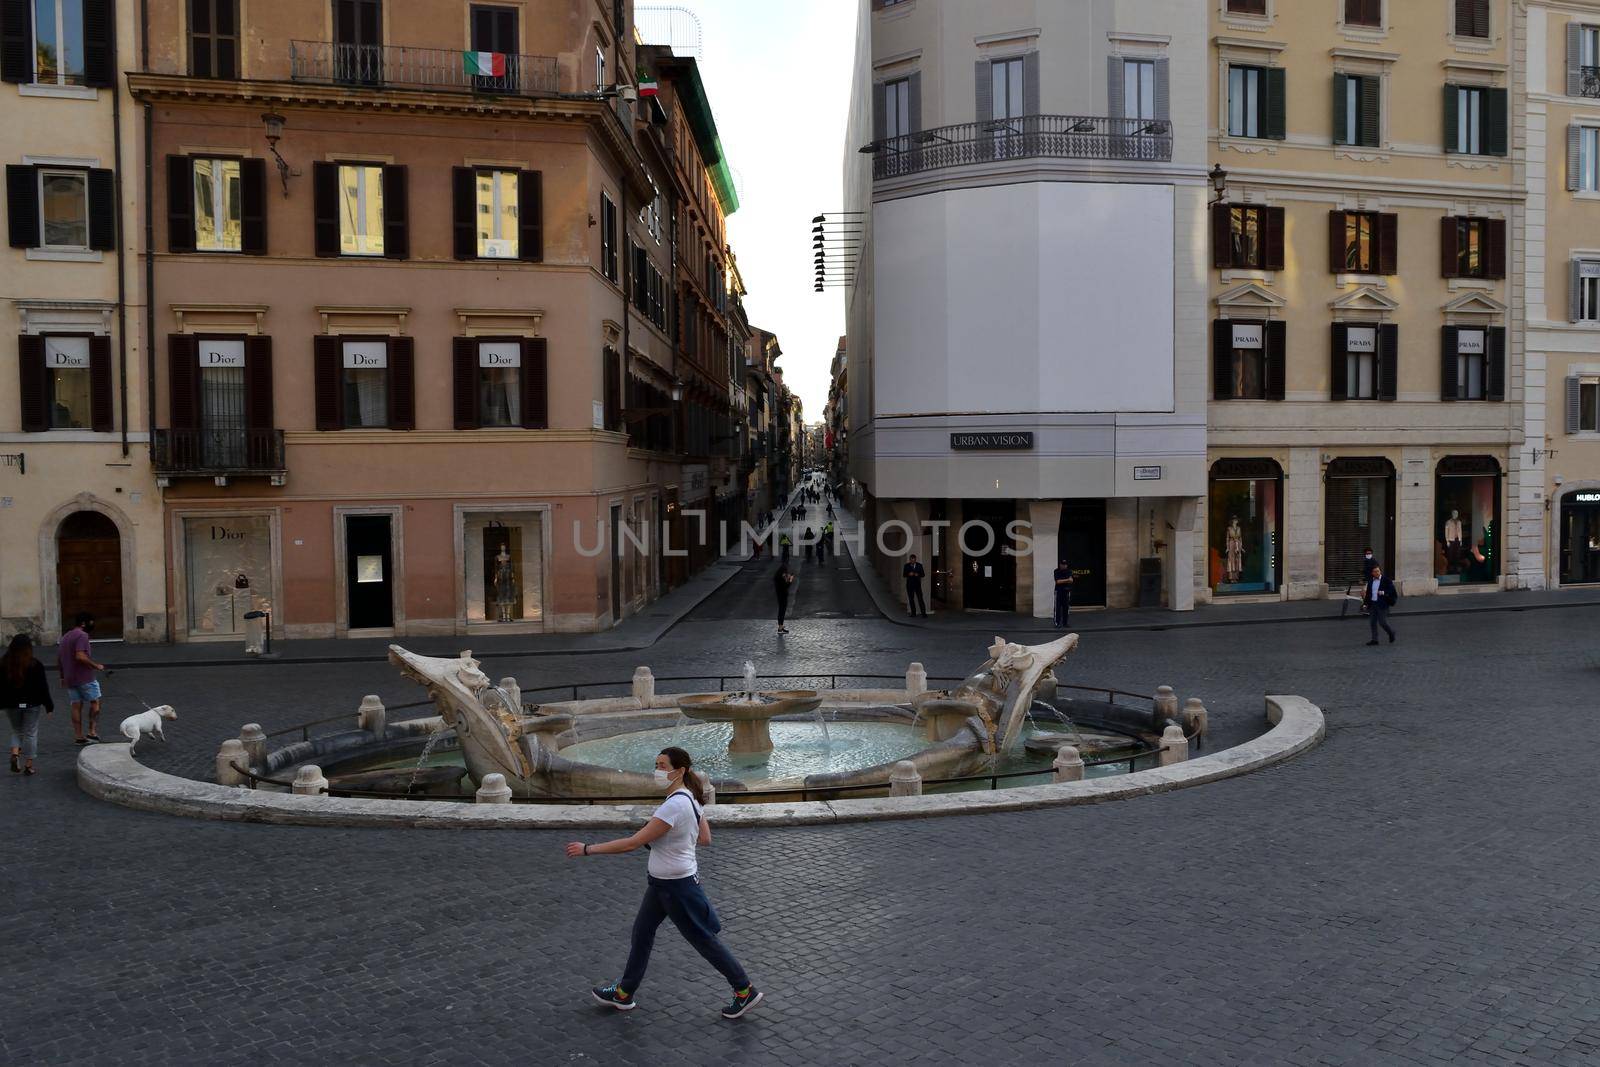 May 8th 2020, Rome, Italy: View of the Via dei Condotti and Piazza di Spagna without tourists due to the phase 2 of lockdown